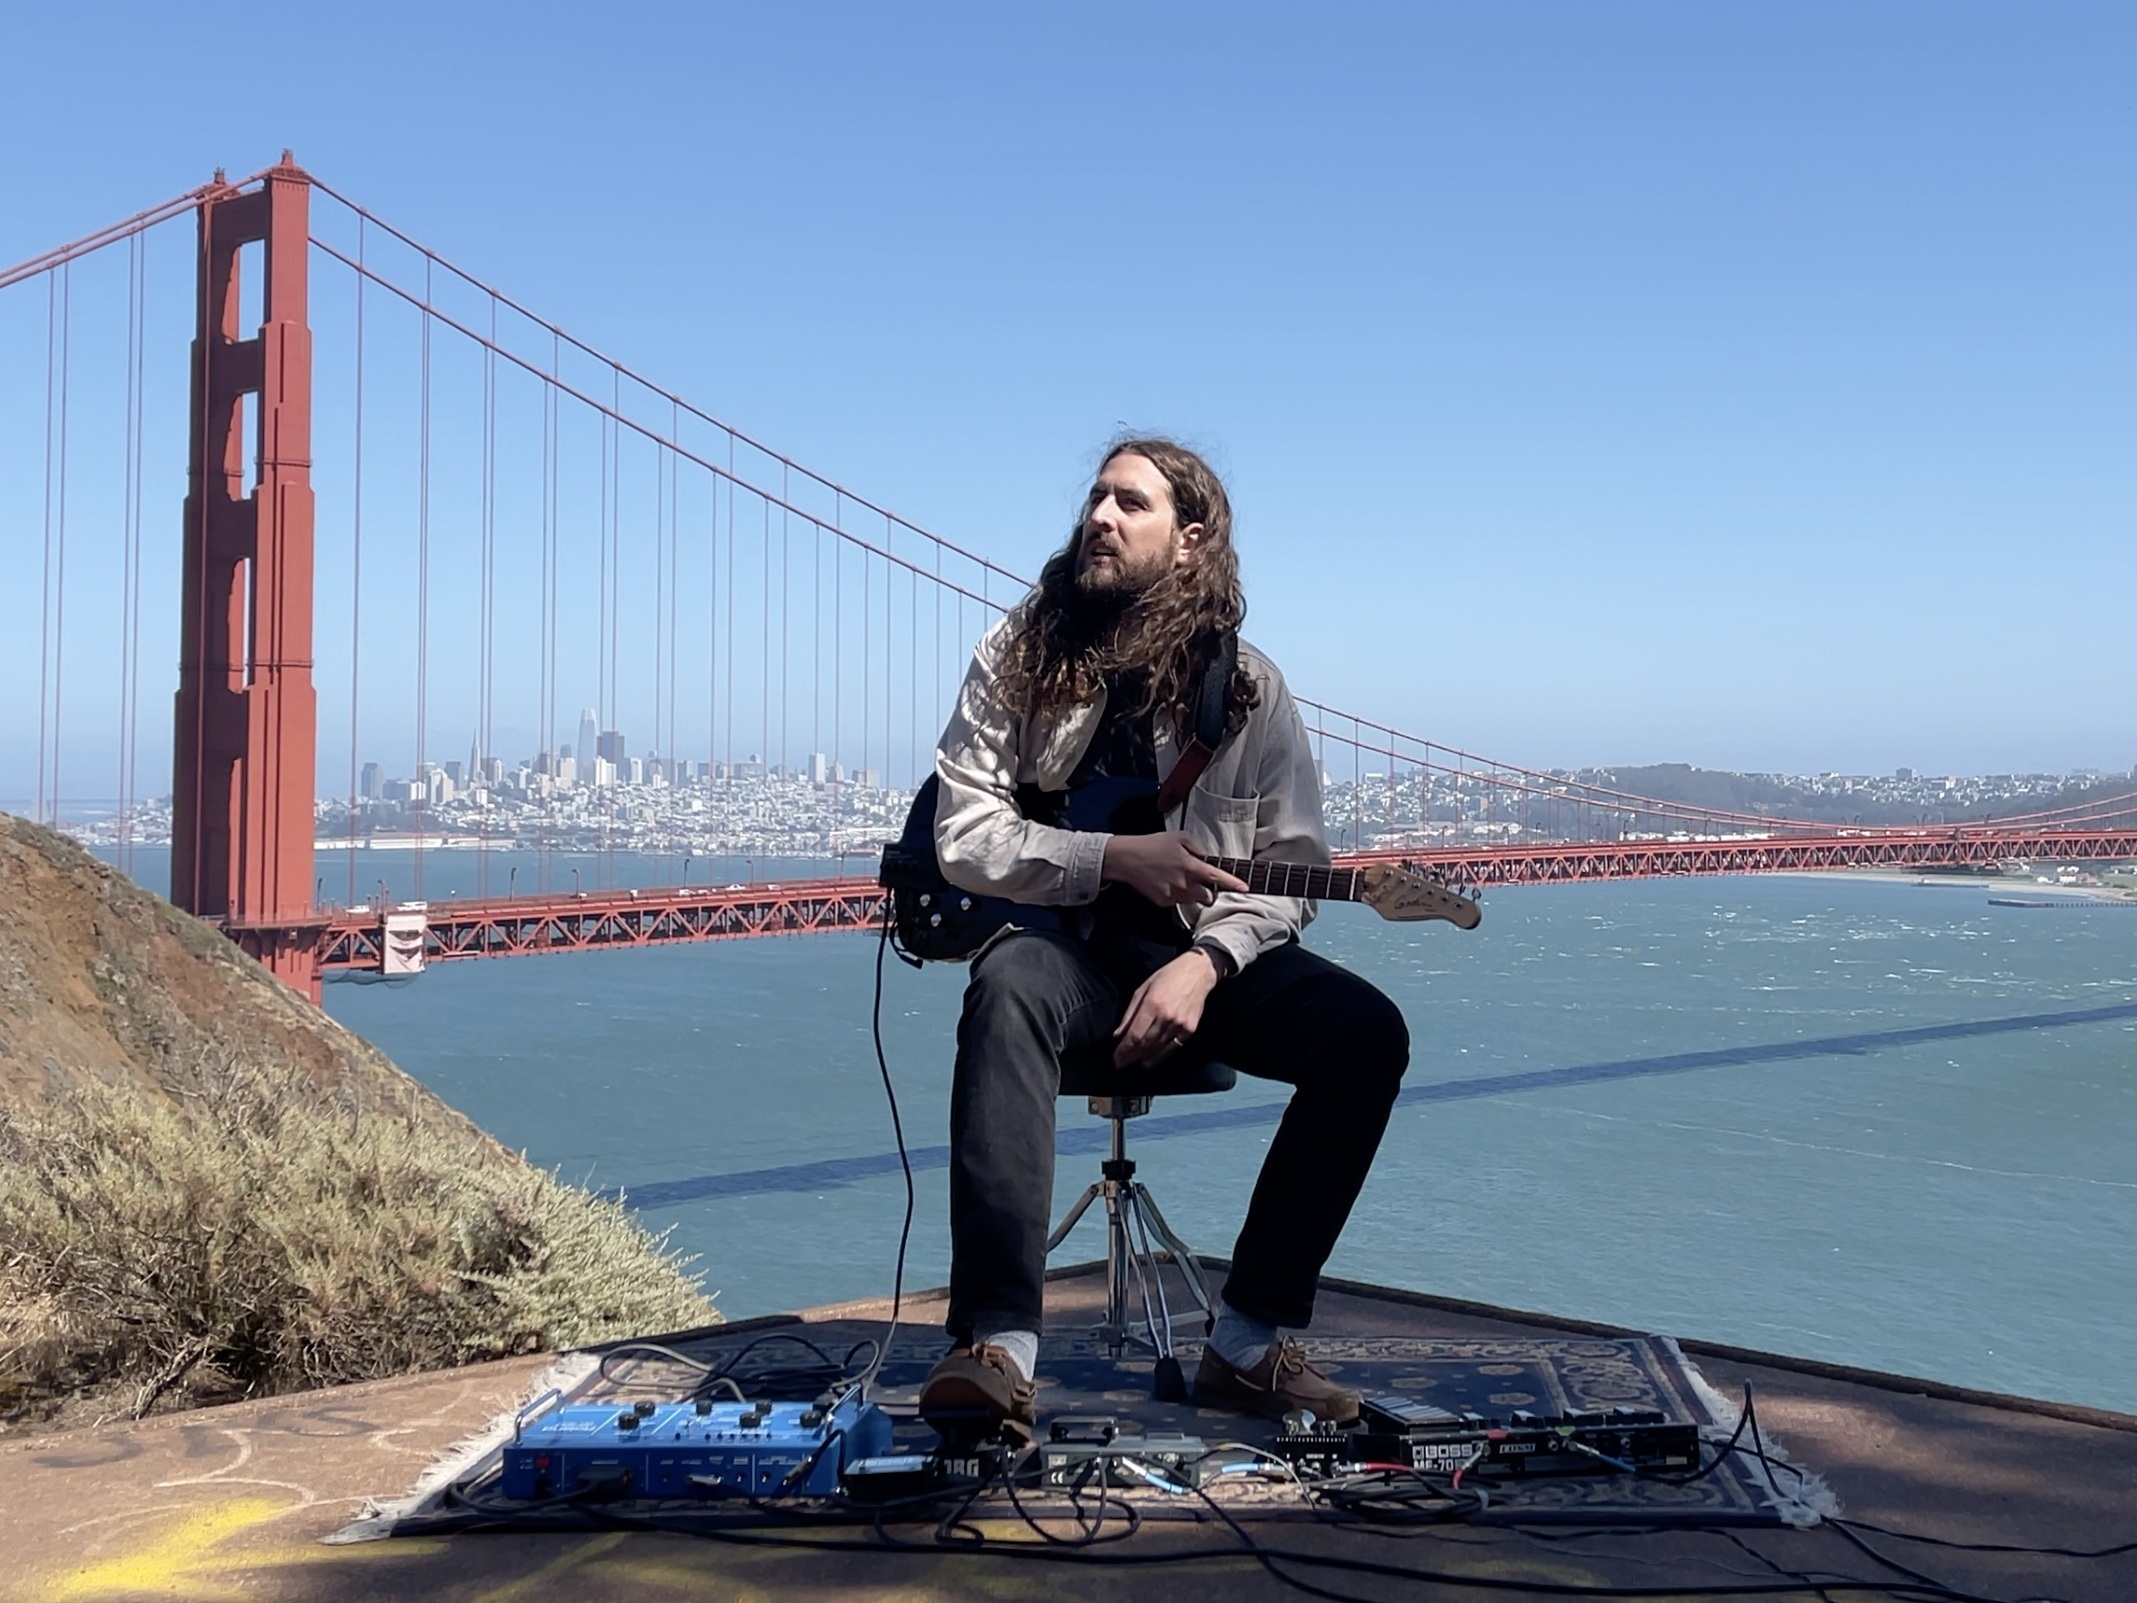 Featured image for “This Musician’s Unlikely Duet Partner? The Golden Gate Bridge”